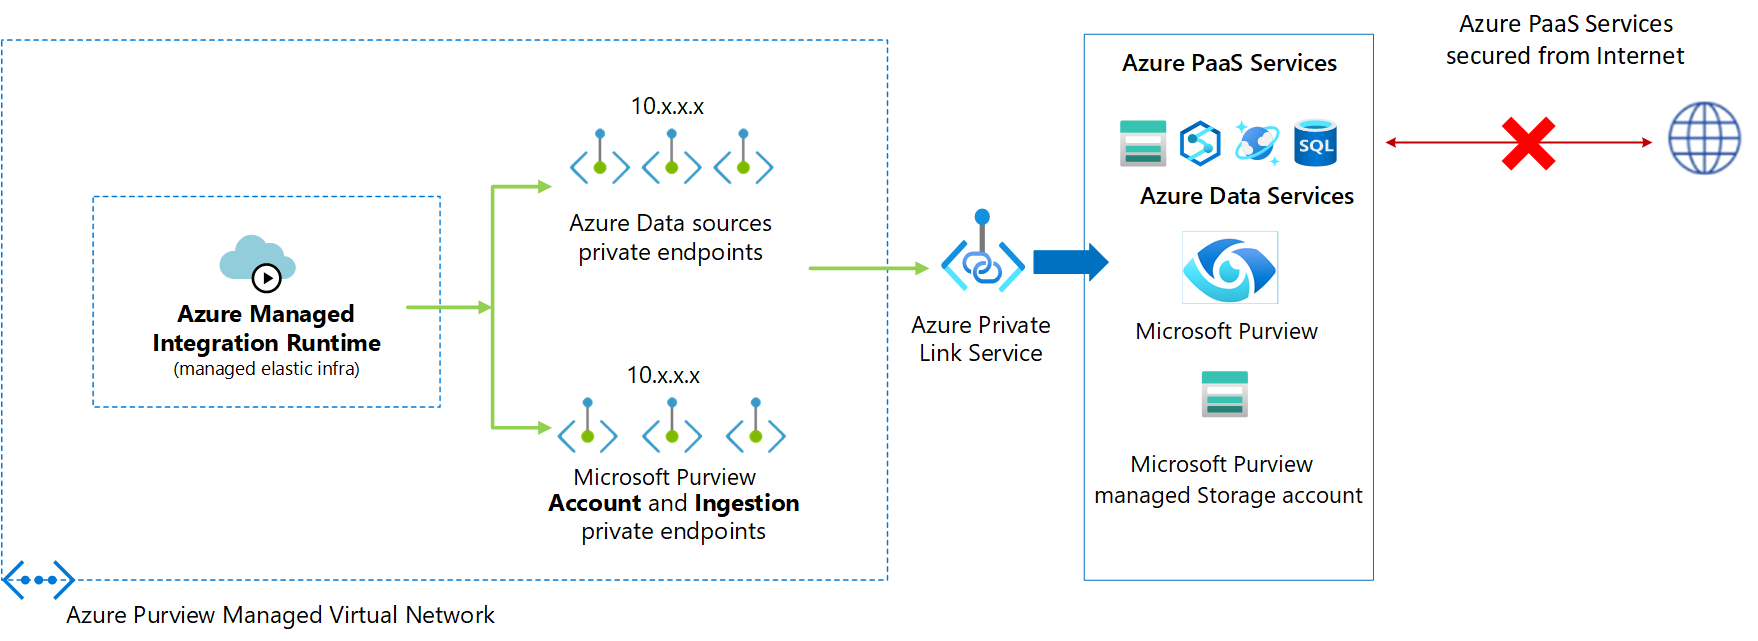 Microsoft Purview Managed Virtual Network architecture